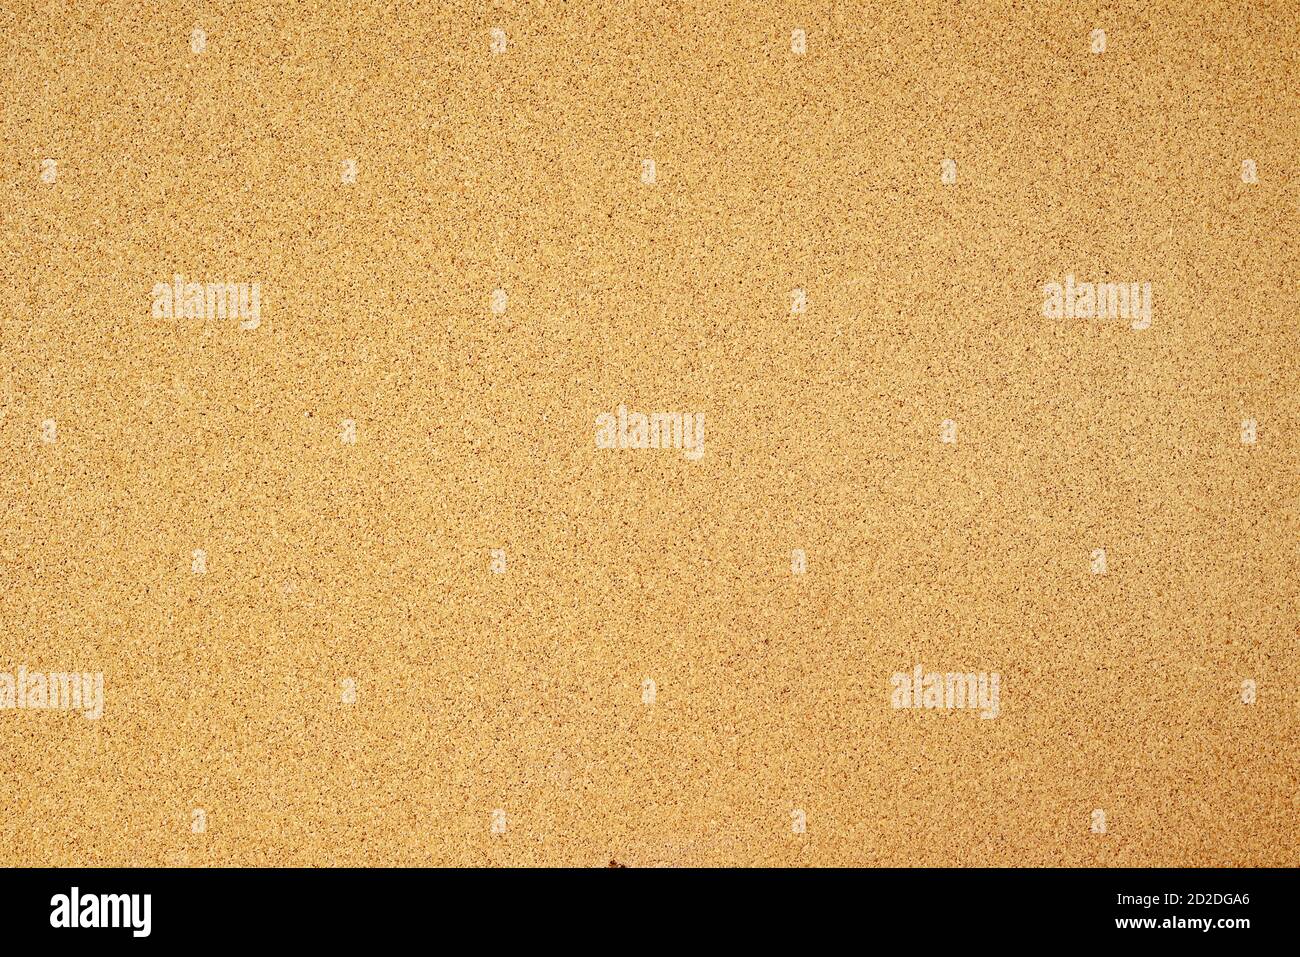 blank cork board for various notes and notices Stock Photo